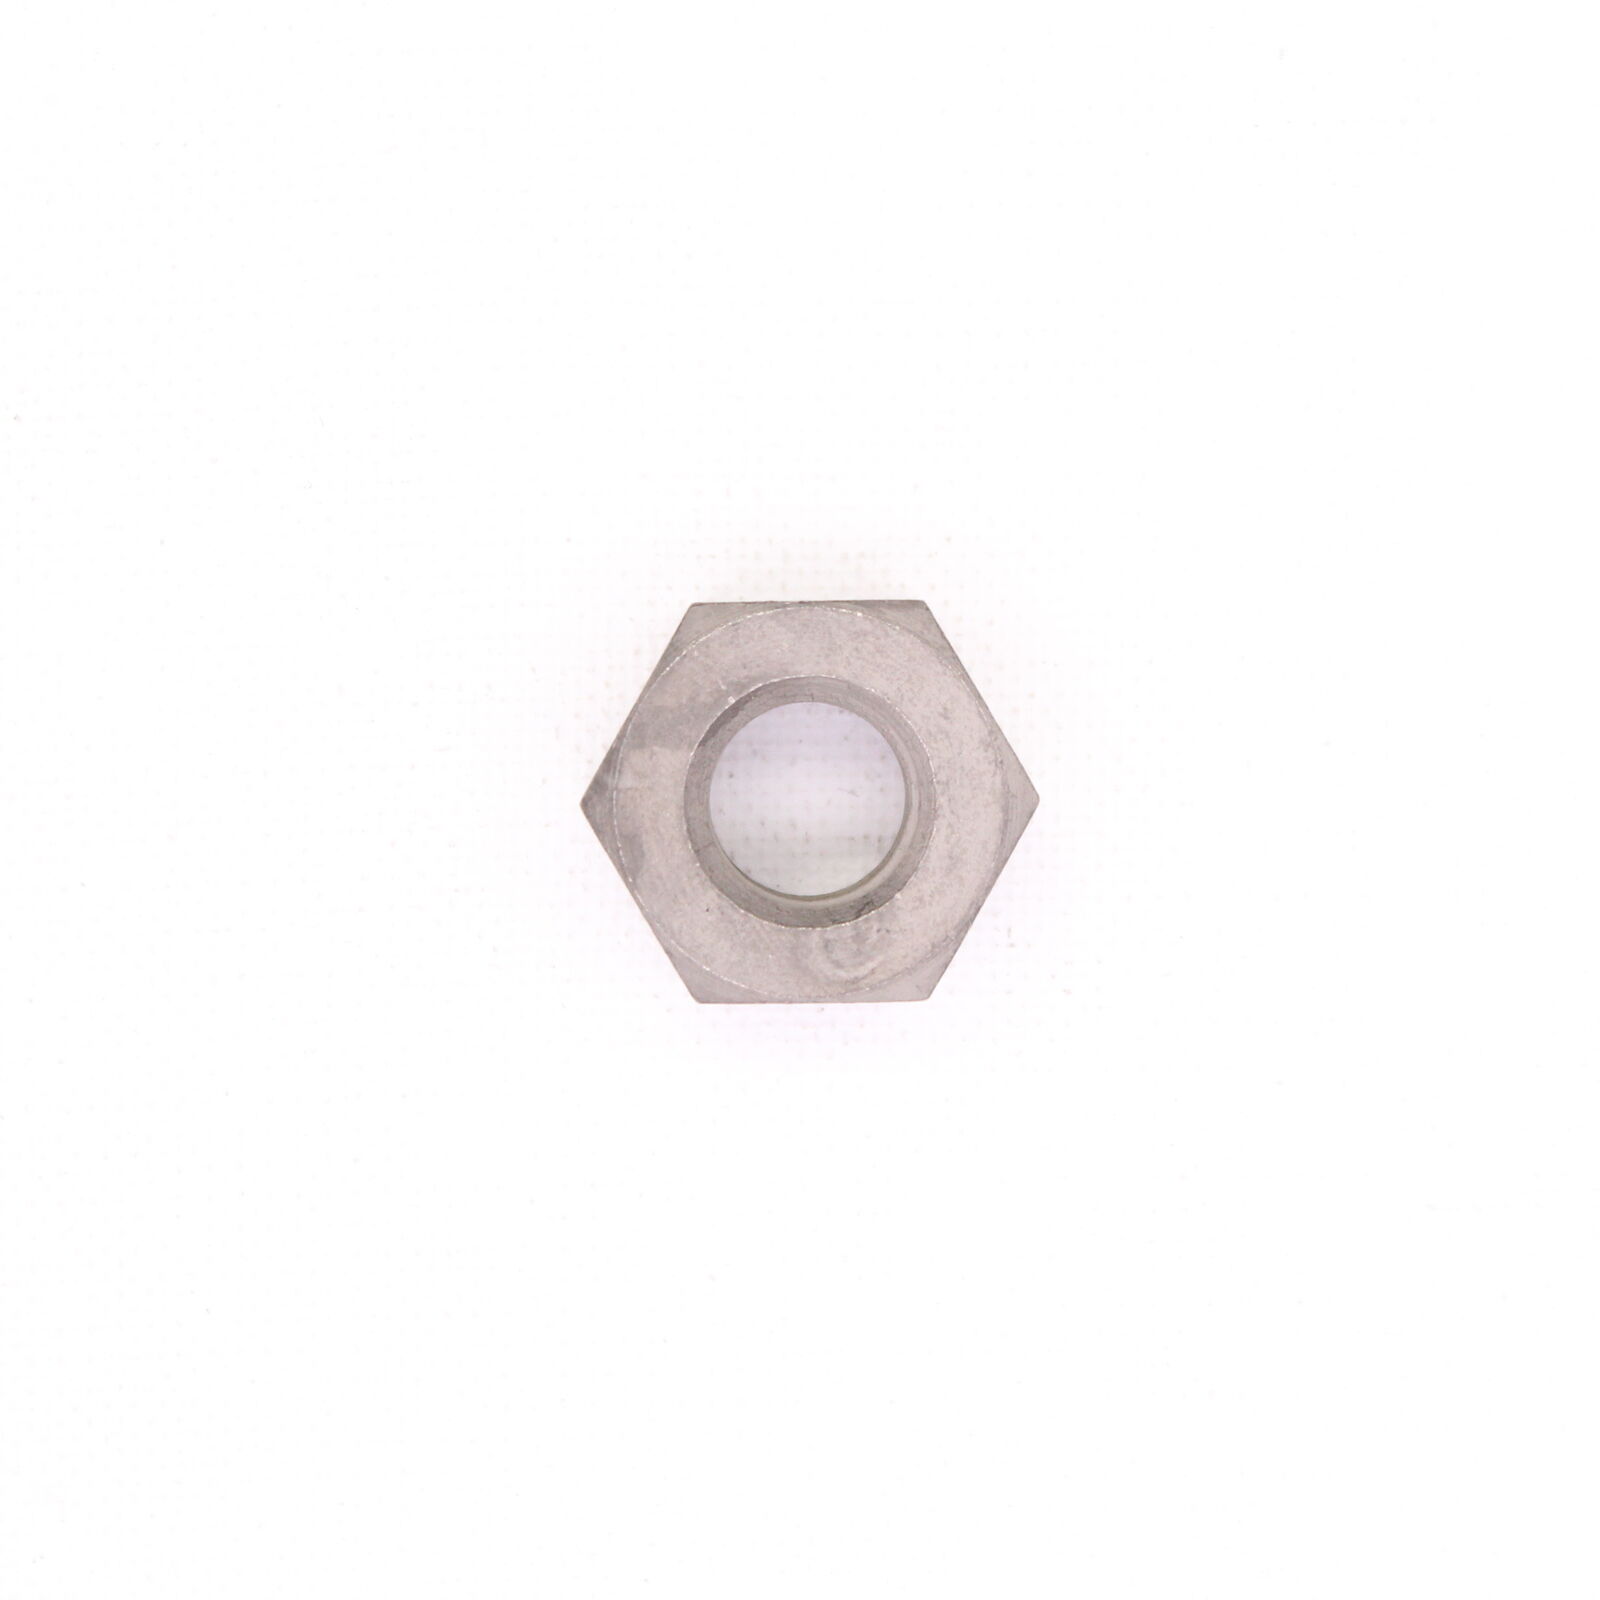 90170-12066 NUT FOR YAMAHA HIDEA PARSUN 2 STROKE 15HP OUTBOARD ENGINE GENERATOR SPARE PARTS